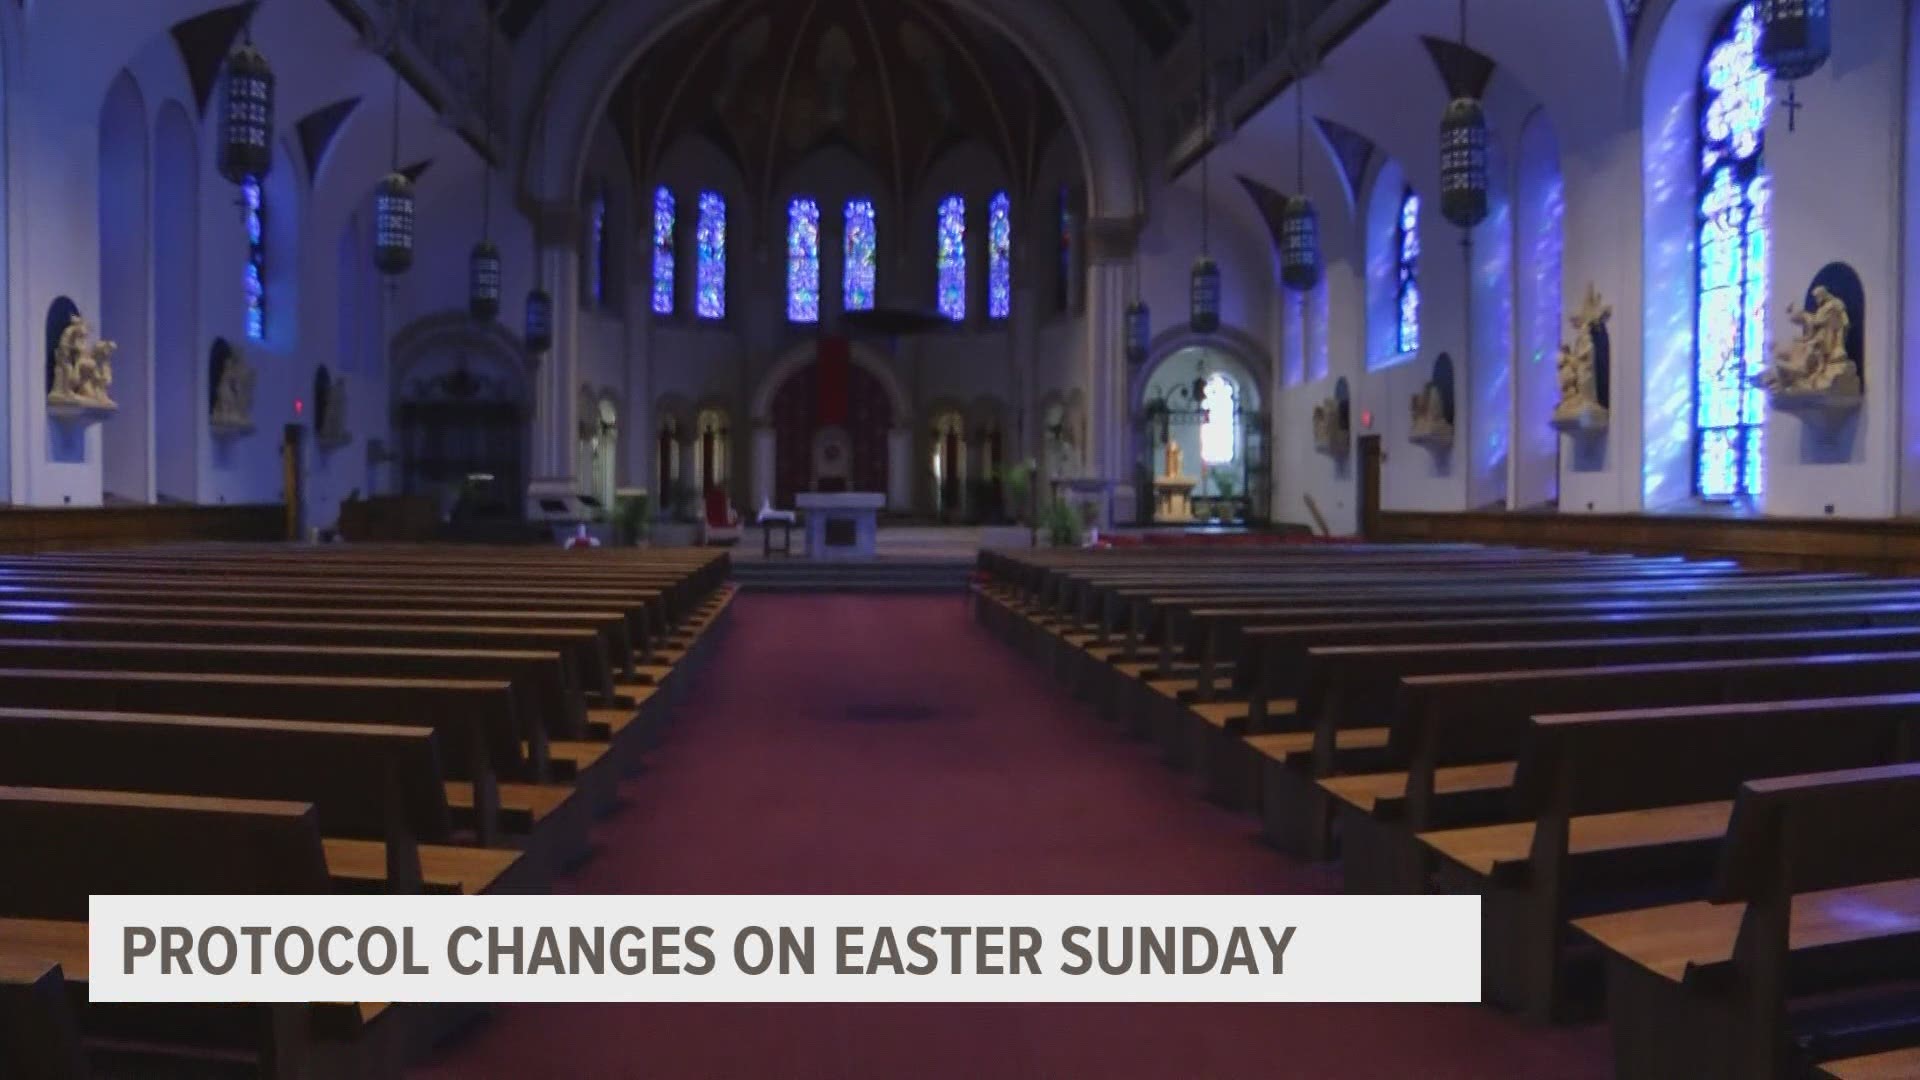 "Currently every other pew is blocked off," the vice chancellor of the Dioceses of Des Moines told Local 5. "Well now we're allowing all pews to be used."